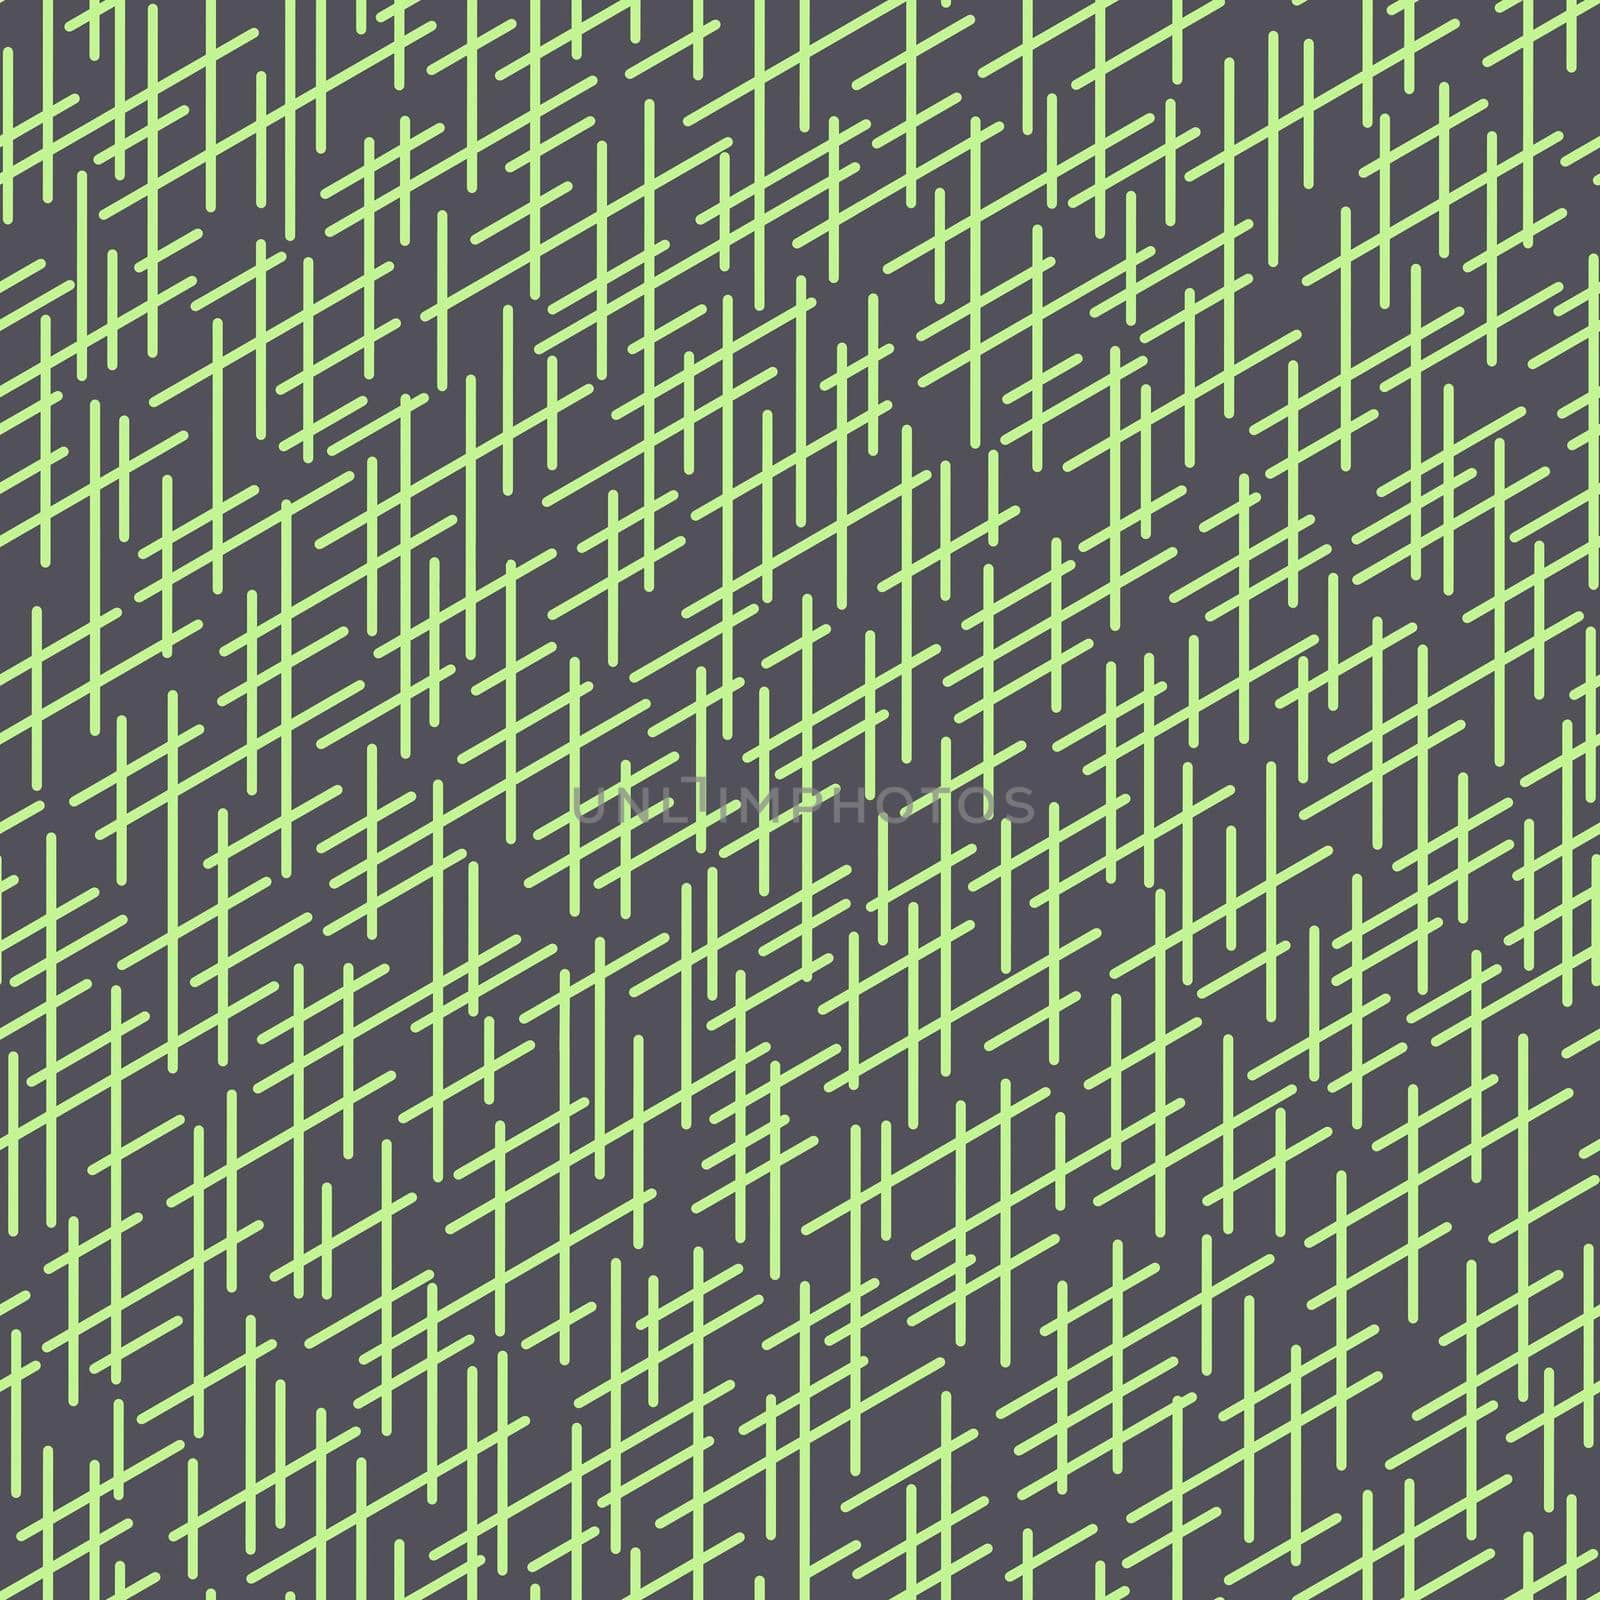 Randomly crossing lines making pattern.Chaotic short lines seamless pattern,chips and sticks modern repeatable motif.Good for print, textile,fabric, background, wrapping paper.Gray yellow colors.